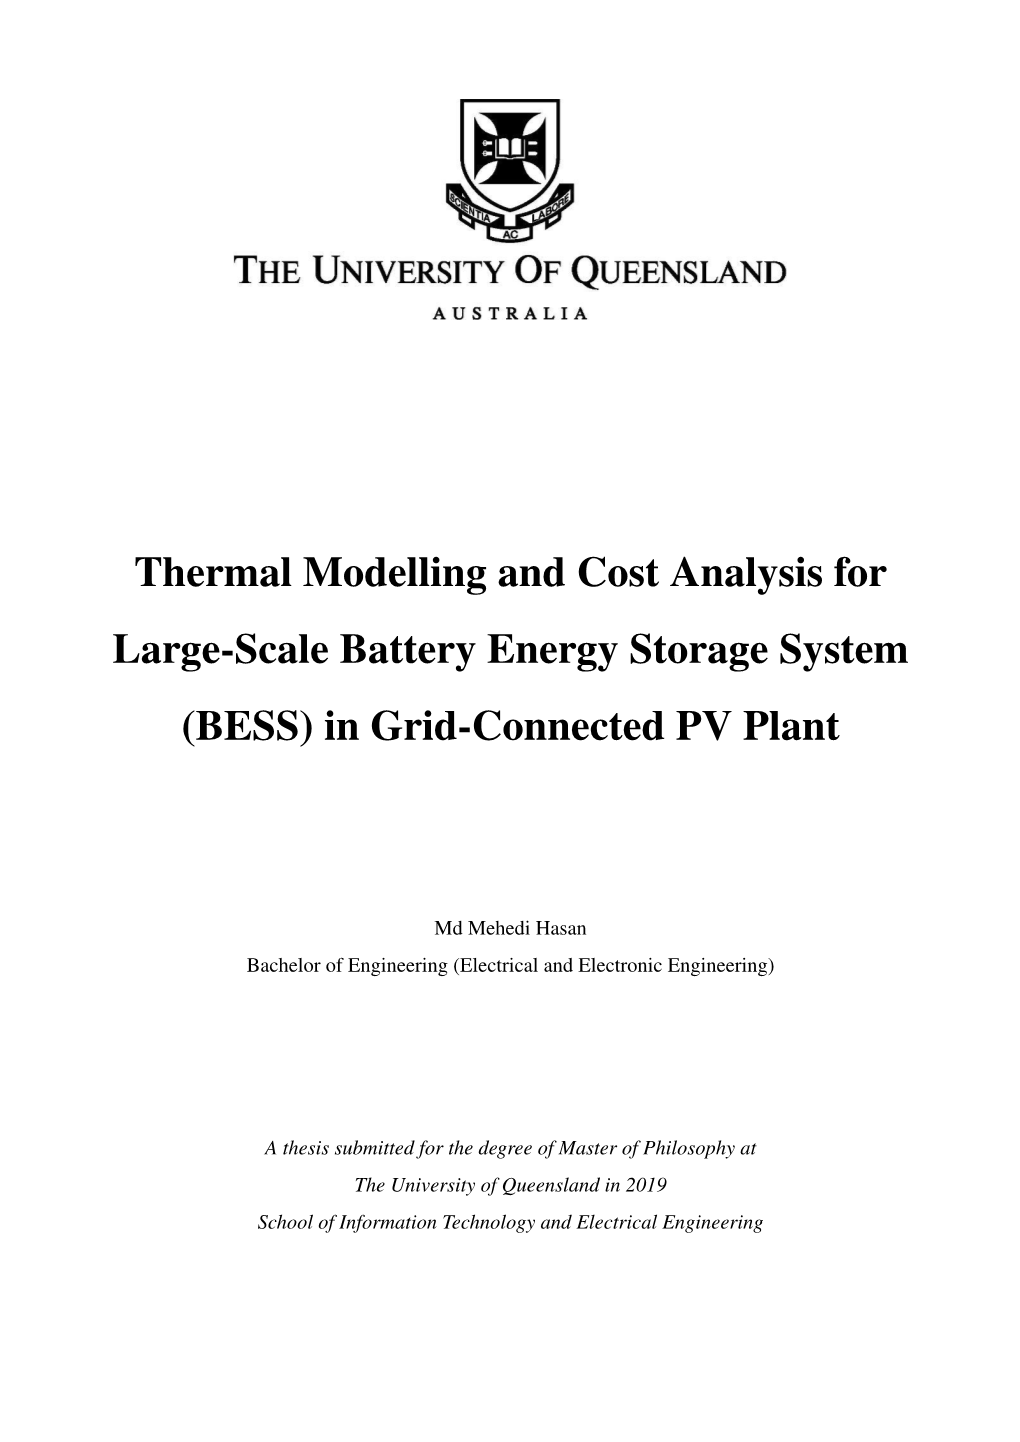 Thermal Modelling and Cost Analysis for Large-Scale Battery Energy Storage System (BESS) in Grid-Connected PV Plant